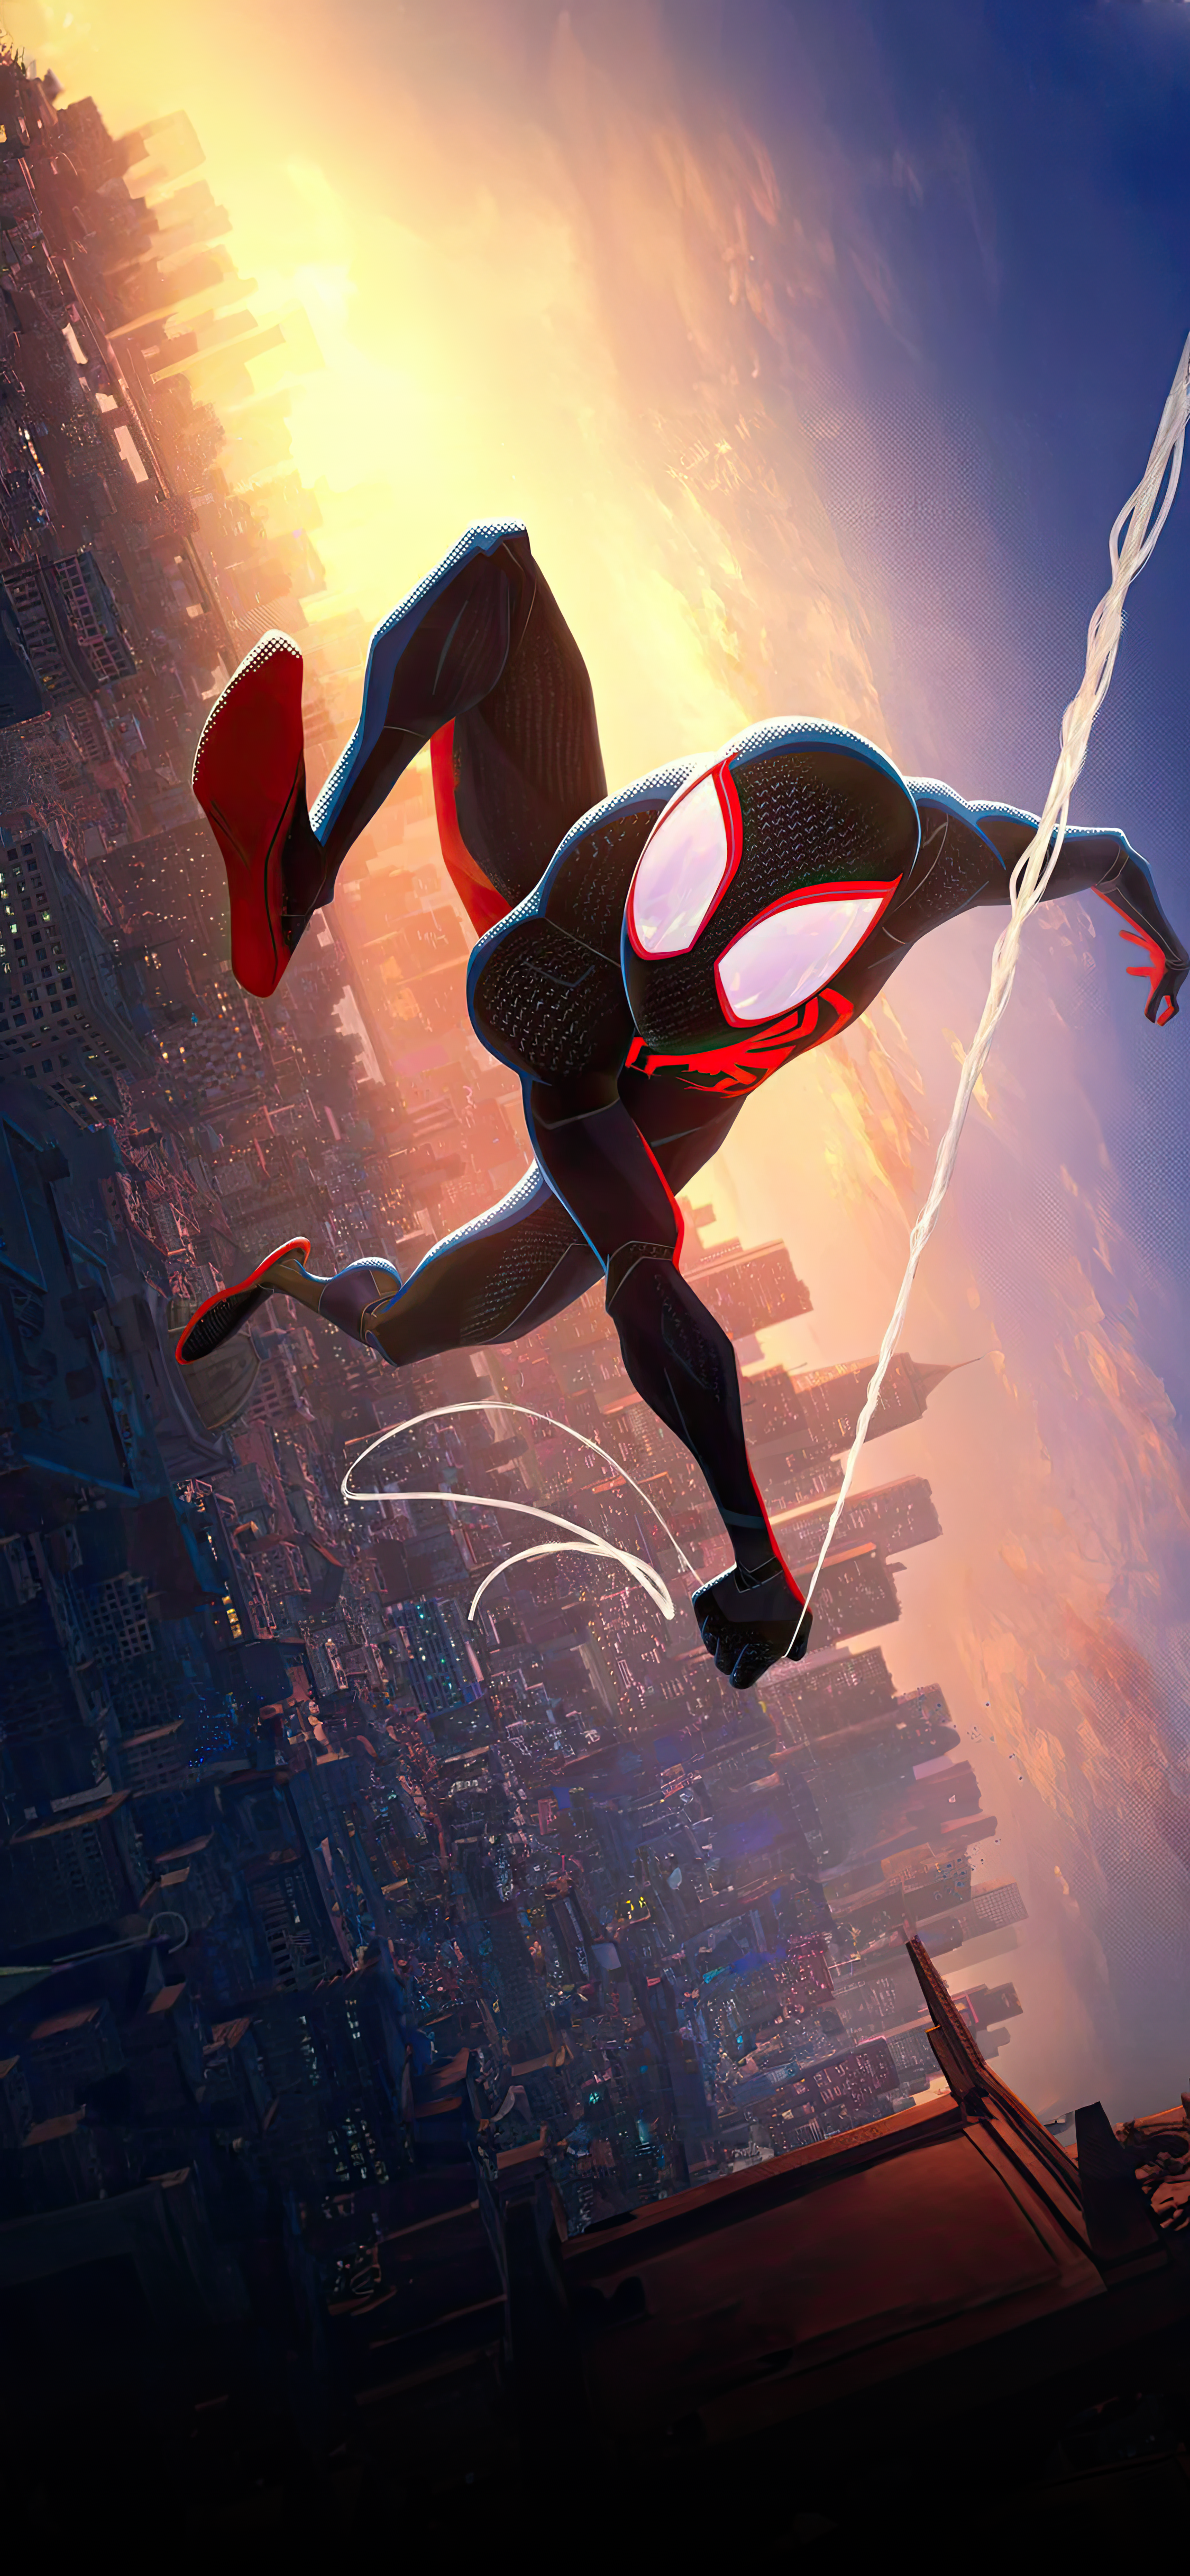 Spiderman Into The Spider Verse 1080x2280 Resolution Wallpapers One Plus  6,Huawei p20,Honor view 10,Vivo y85,Oppo f7,Xiaomi Mi A2